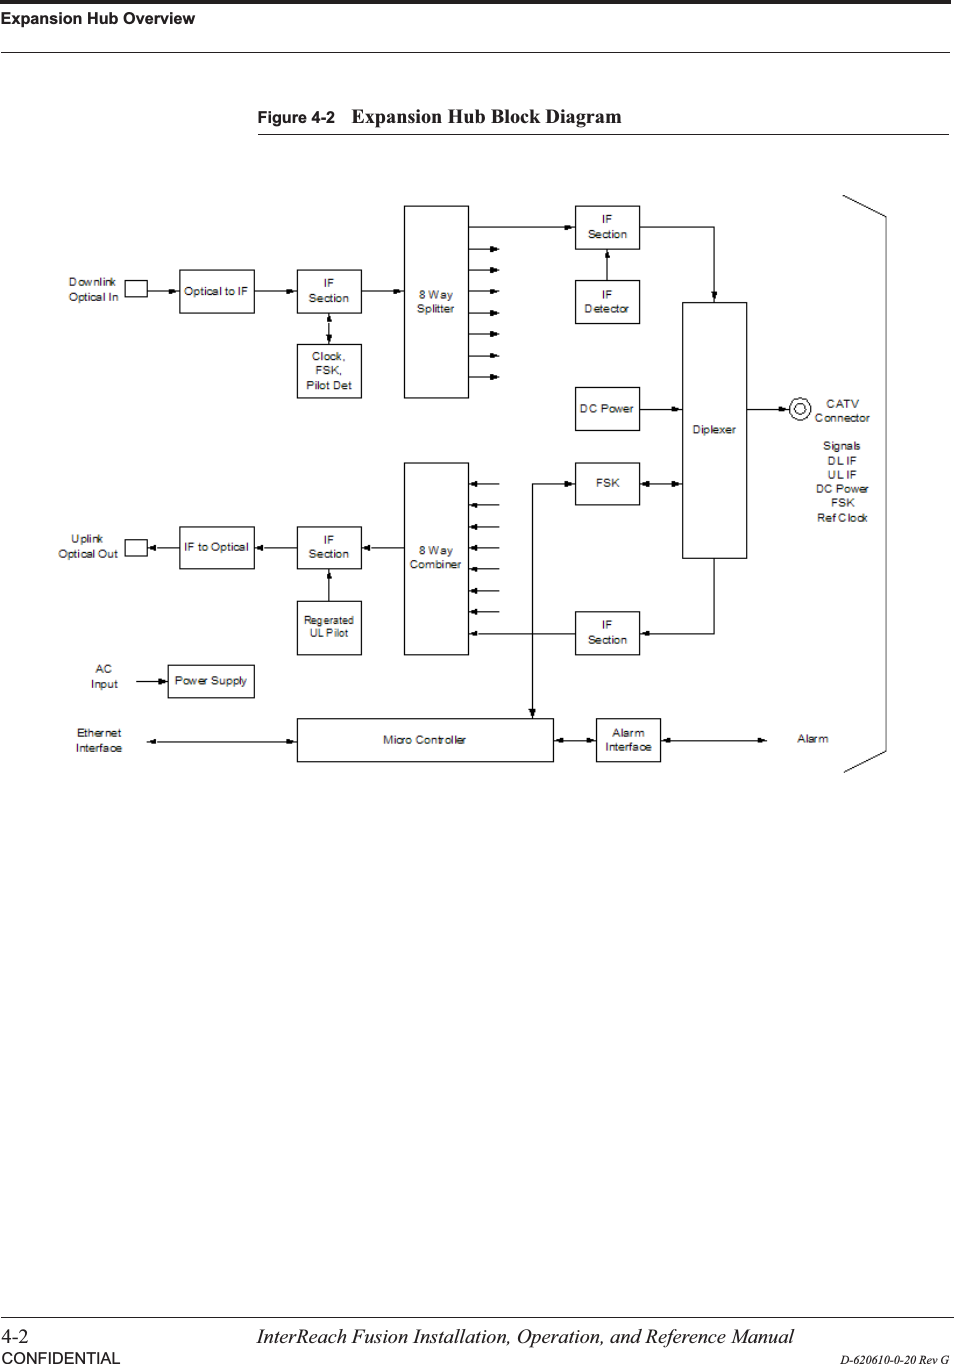 Expansion Hub Overview4-2 InterReach Fusion Installation, Operation, and Reference Manual  CONFIDENTIAL D-620610-0-20 Rev GFigure 4-2 Expansion Hub Block Diagram